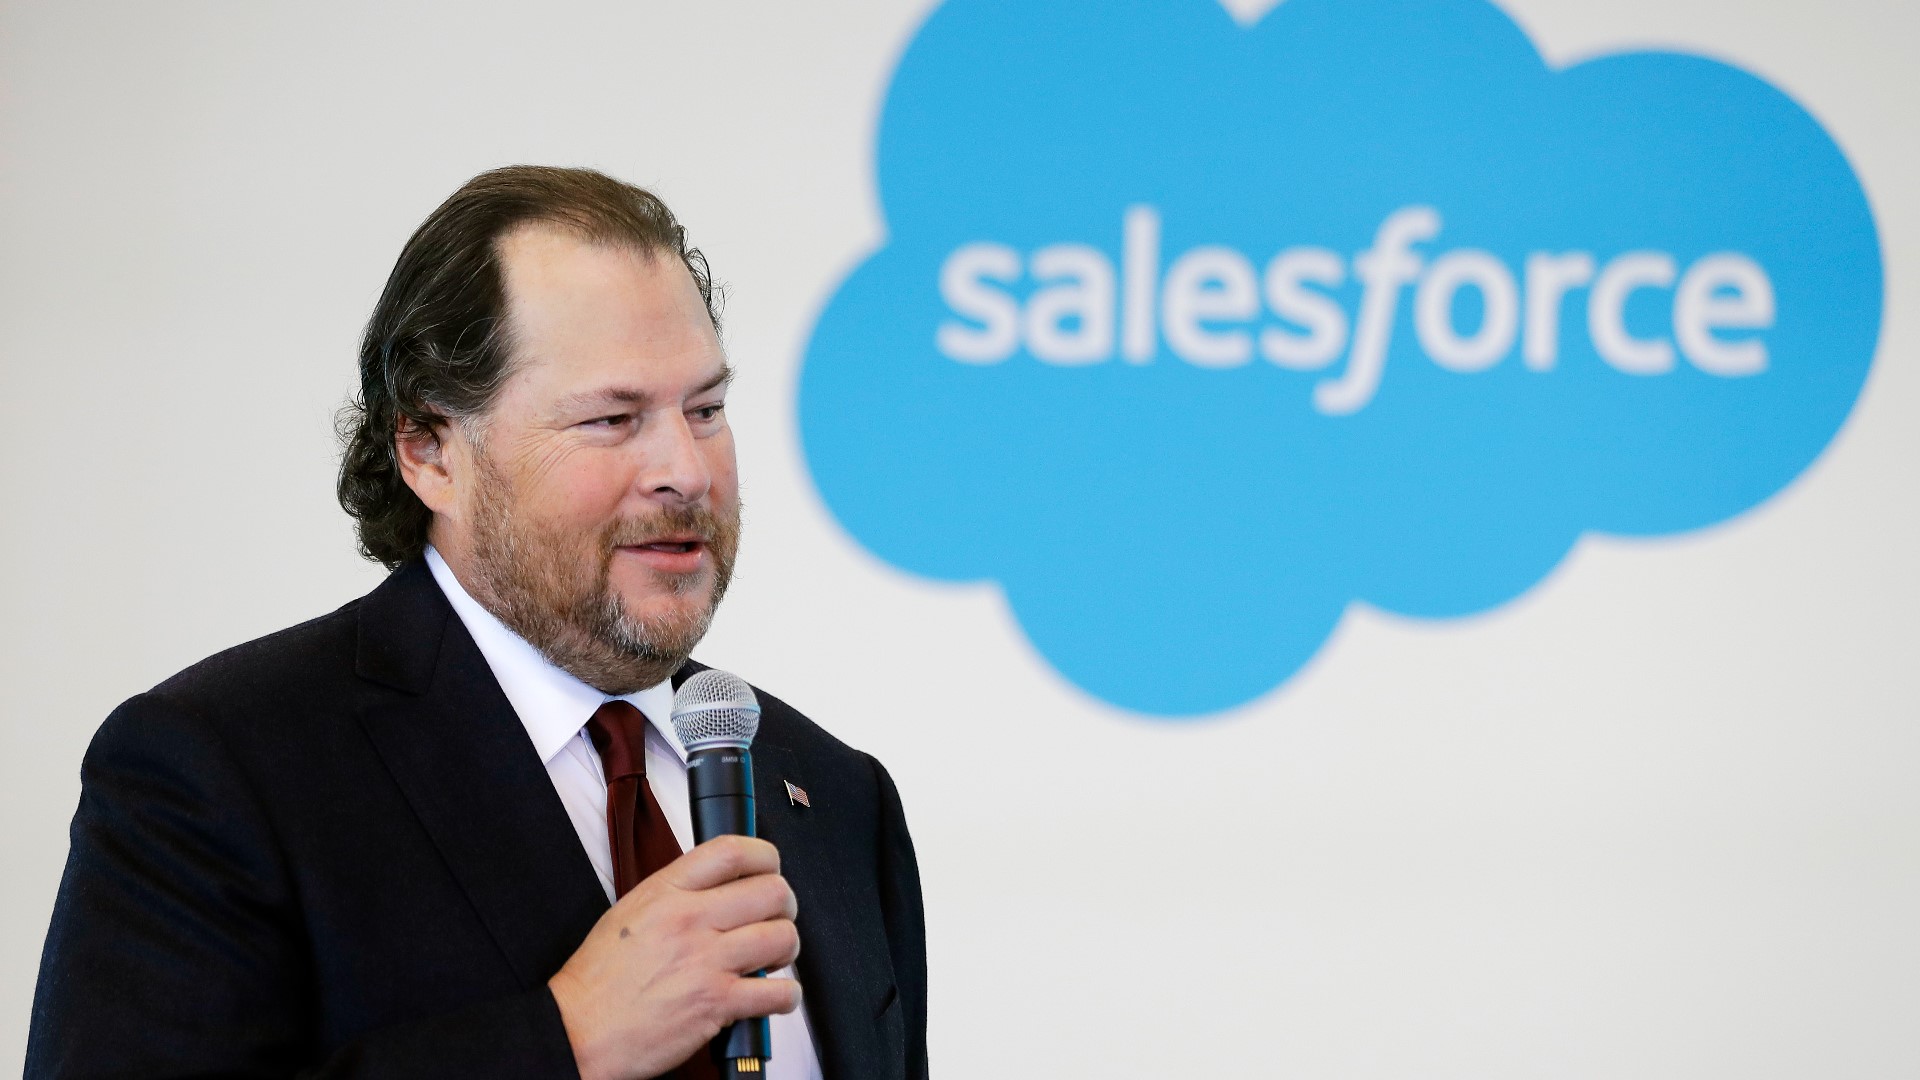 CEO Marc Benioff said employees being released will receive nearly five months of pay, health insurance, career resources, and other benefits.